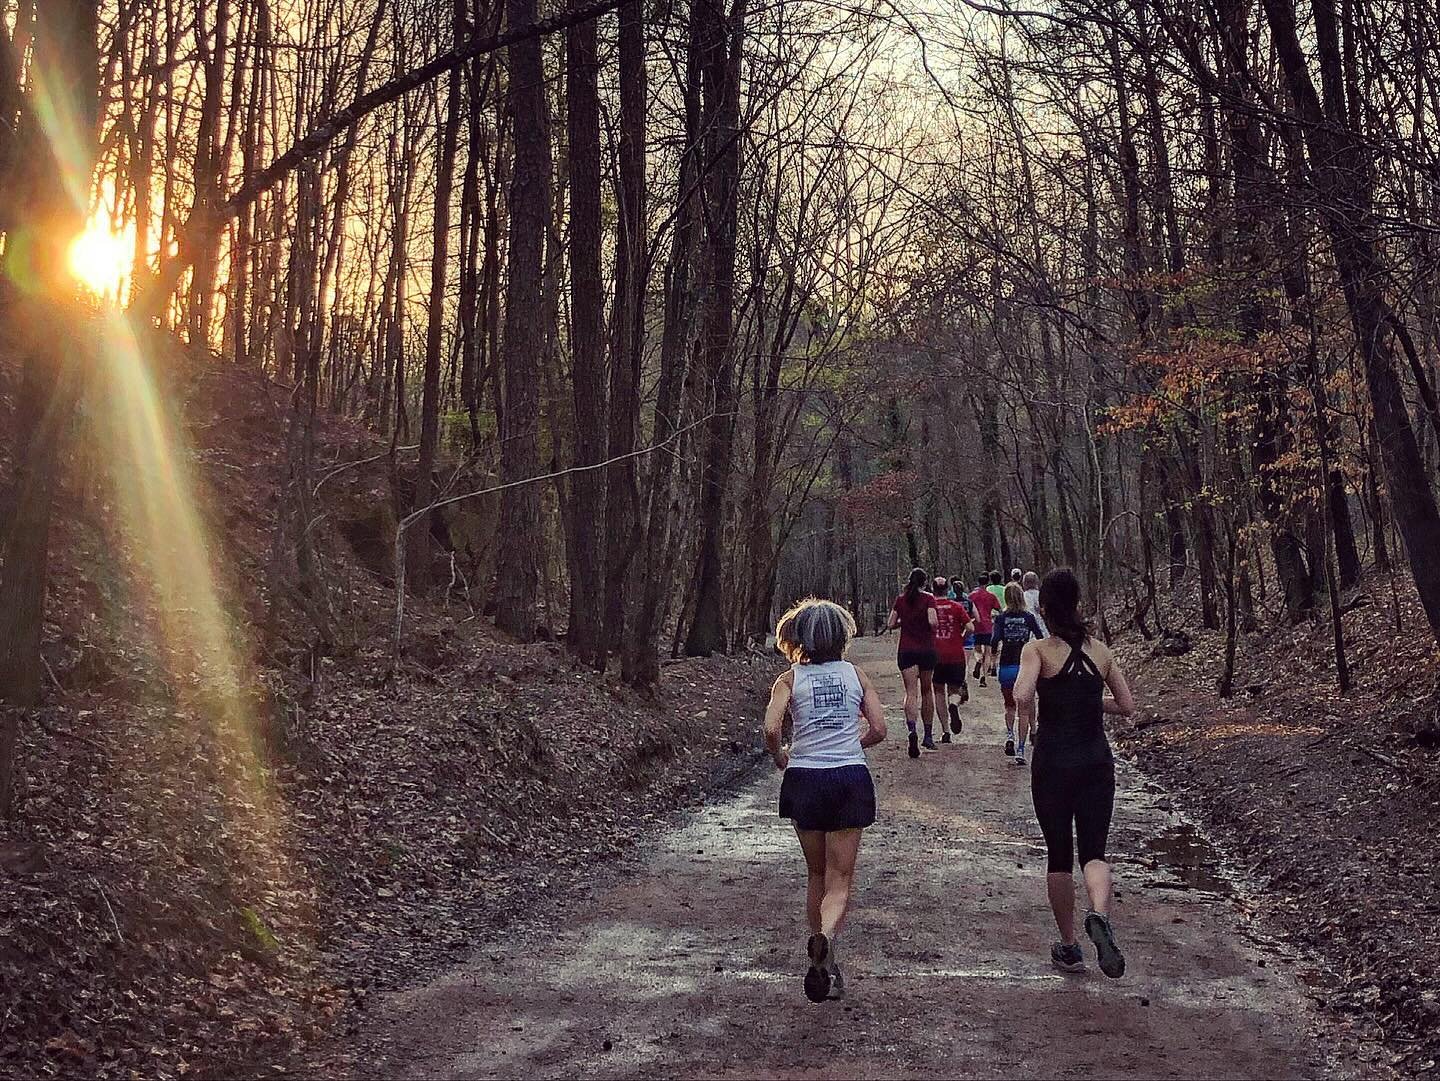 Tuesday Night Trails! Tonight at @redmountainpark at 5:45. We are stoked to sponsor this event with @runbuts, @alabamaoutdoorsofficial, and @thefullponte. There are six pace groups to provide a range that best fits you! We would love to see you there